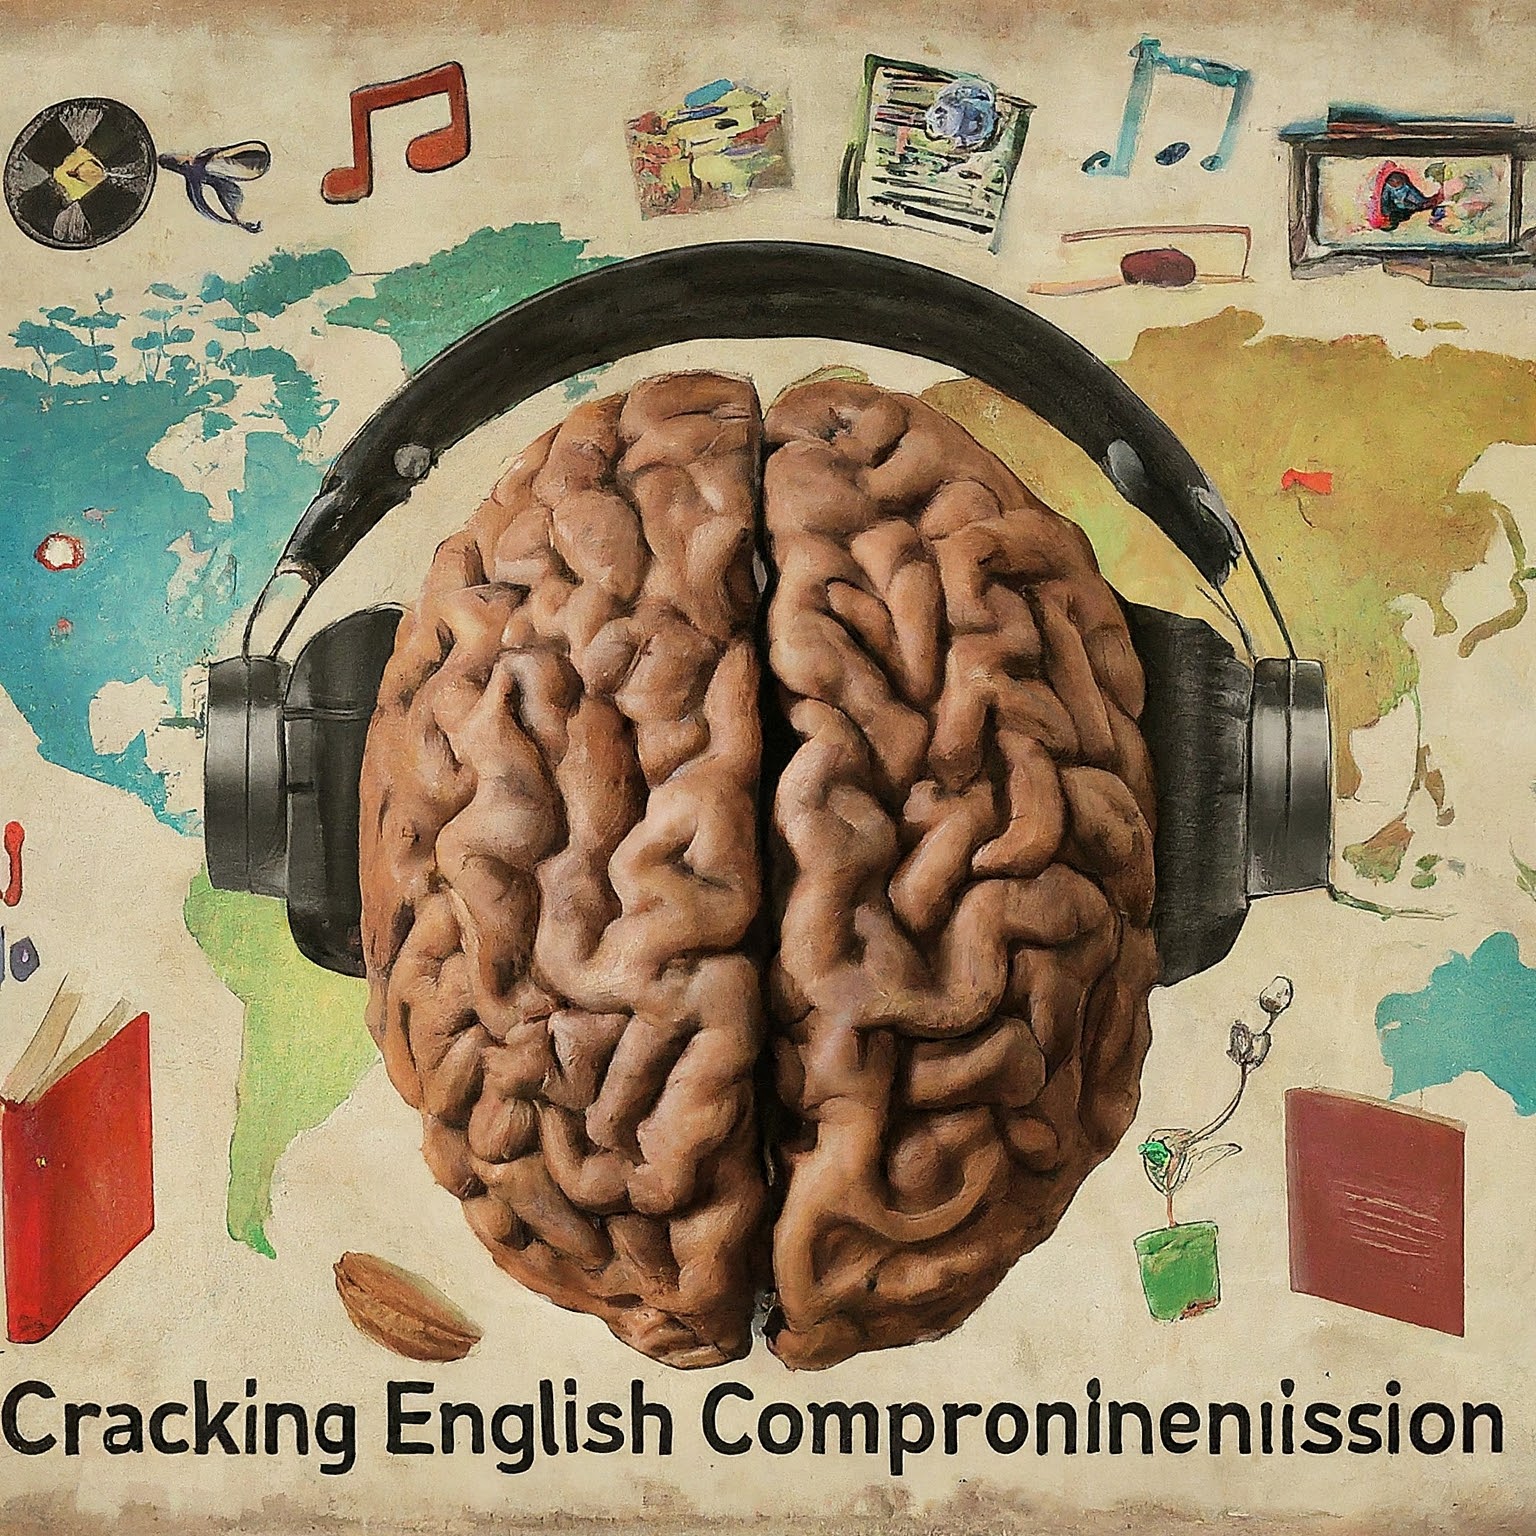 Cracking English Comprehension: A Multimedia Journey